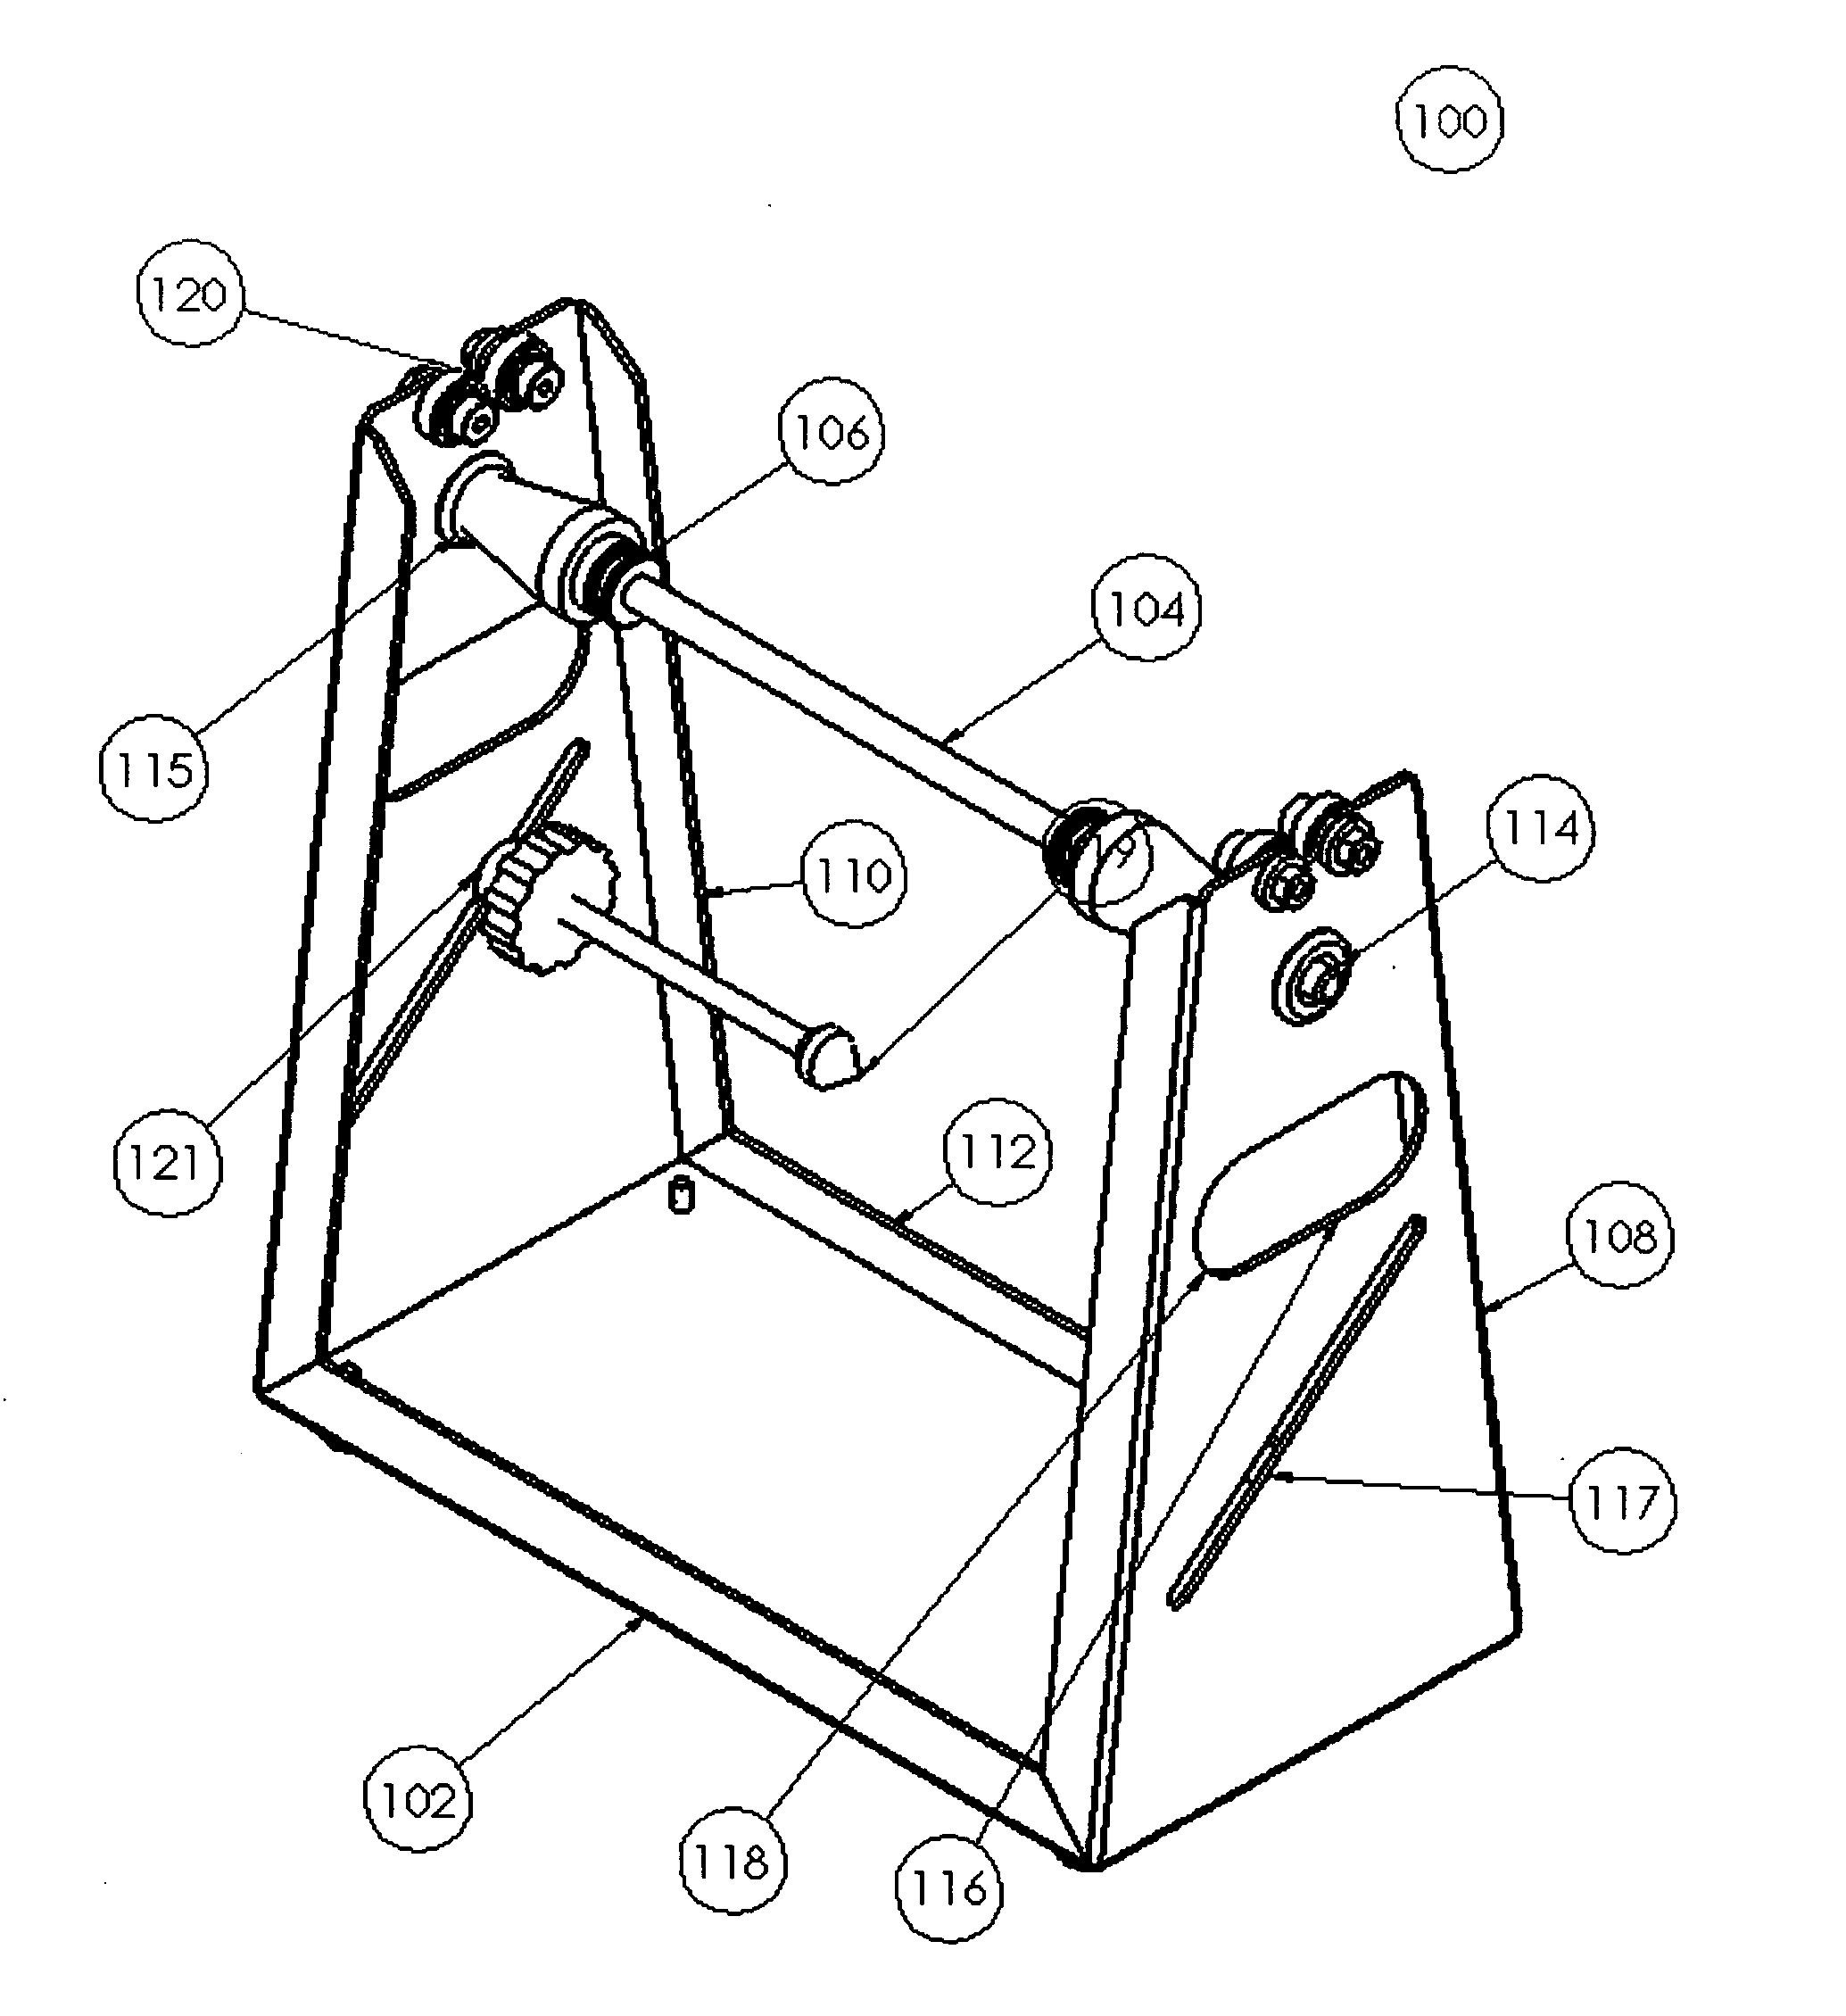 Tire balancing devices and methods